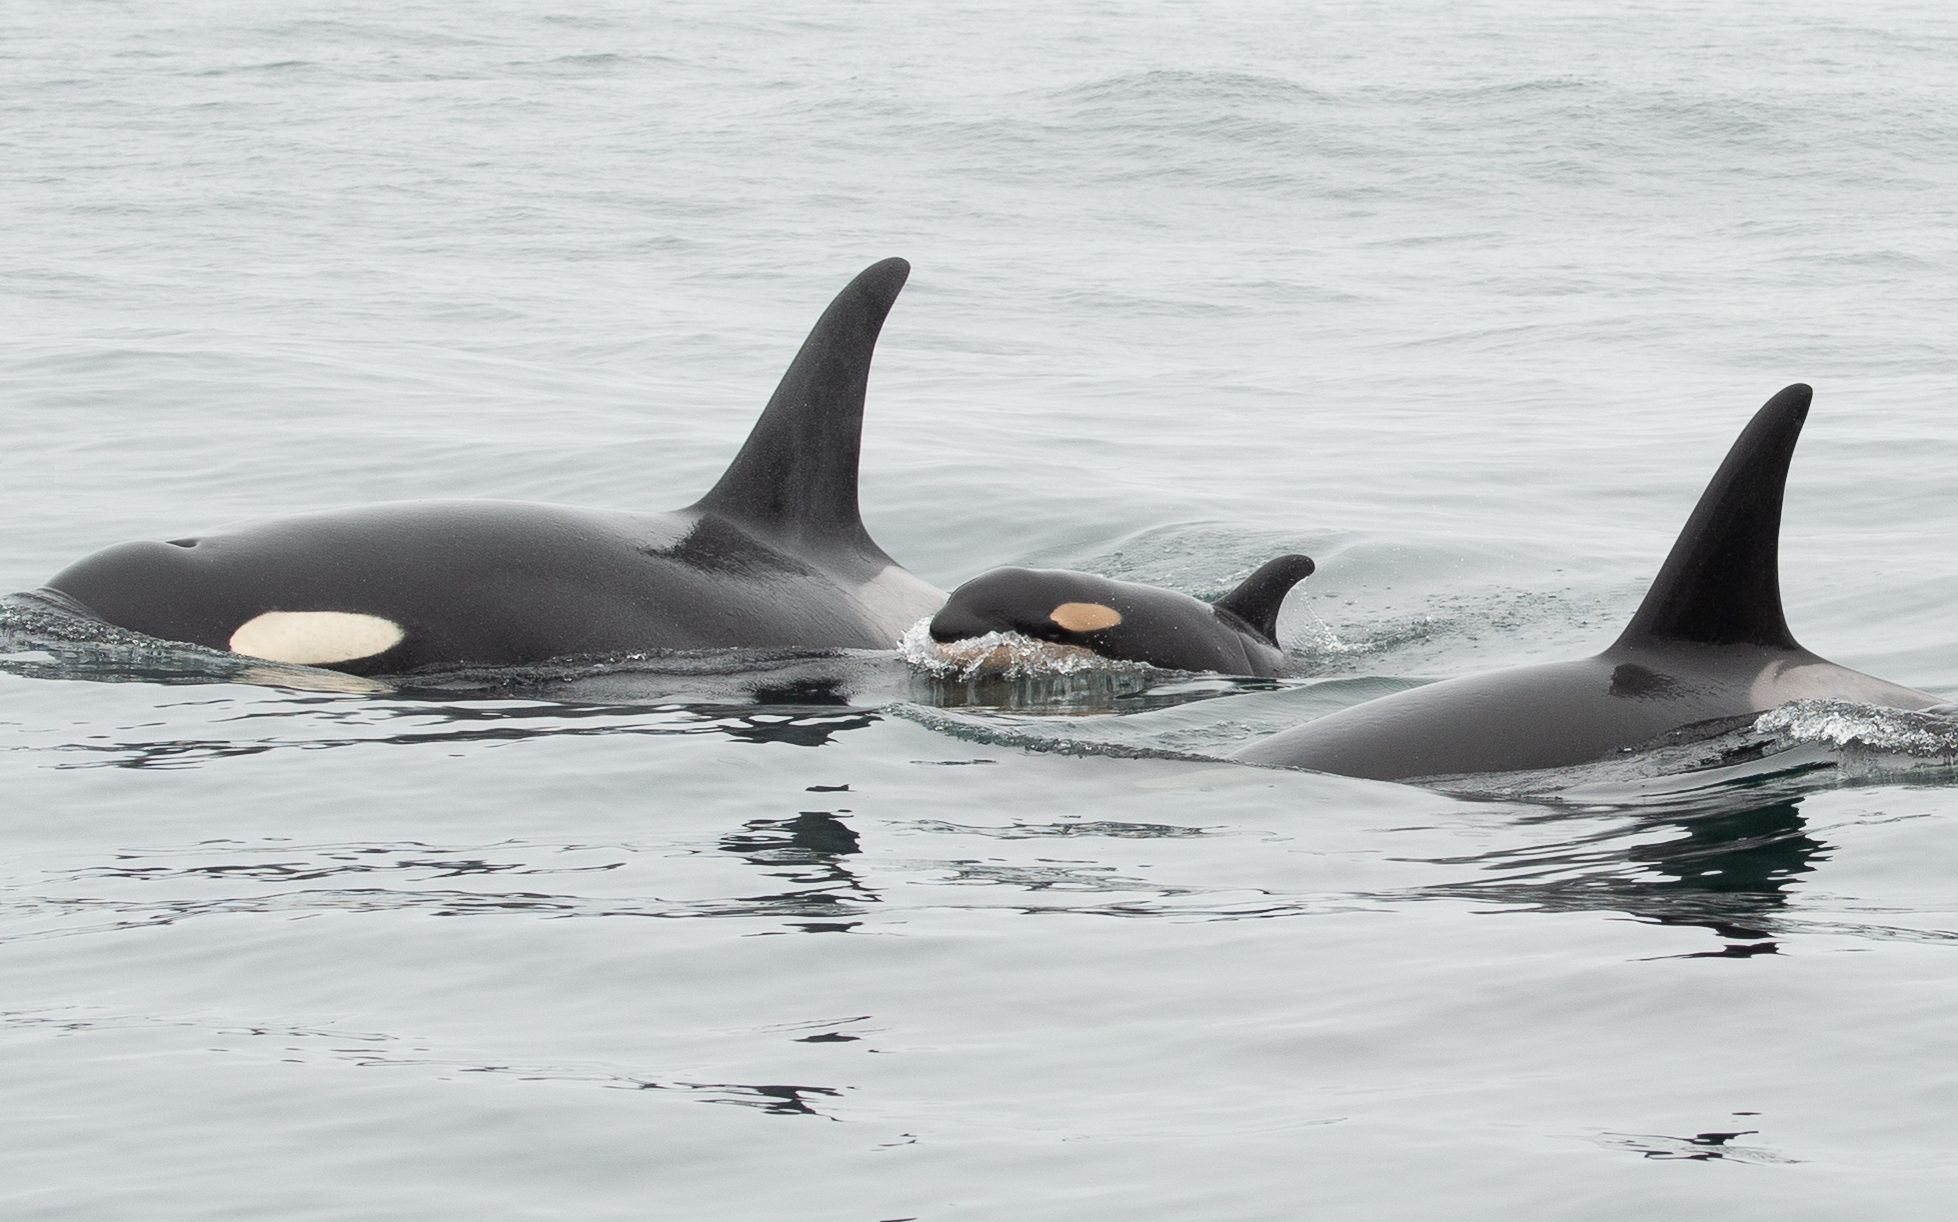 Newborn Southern Resident Killer Whale calf spotted off the coast of